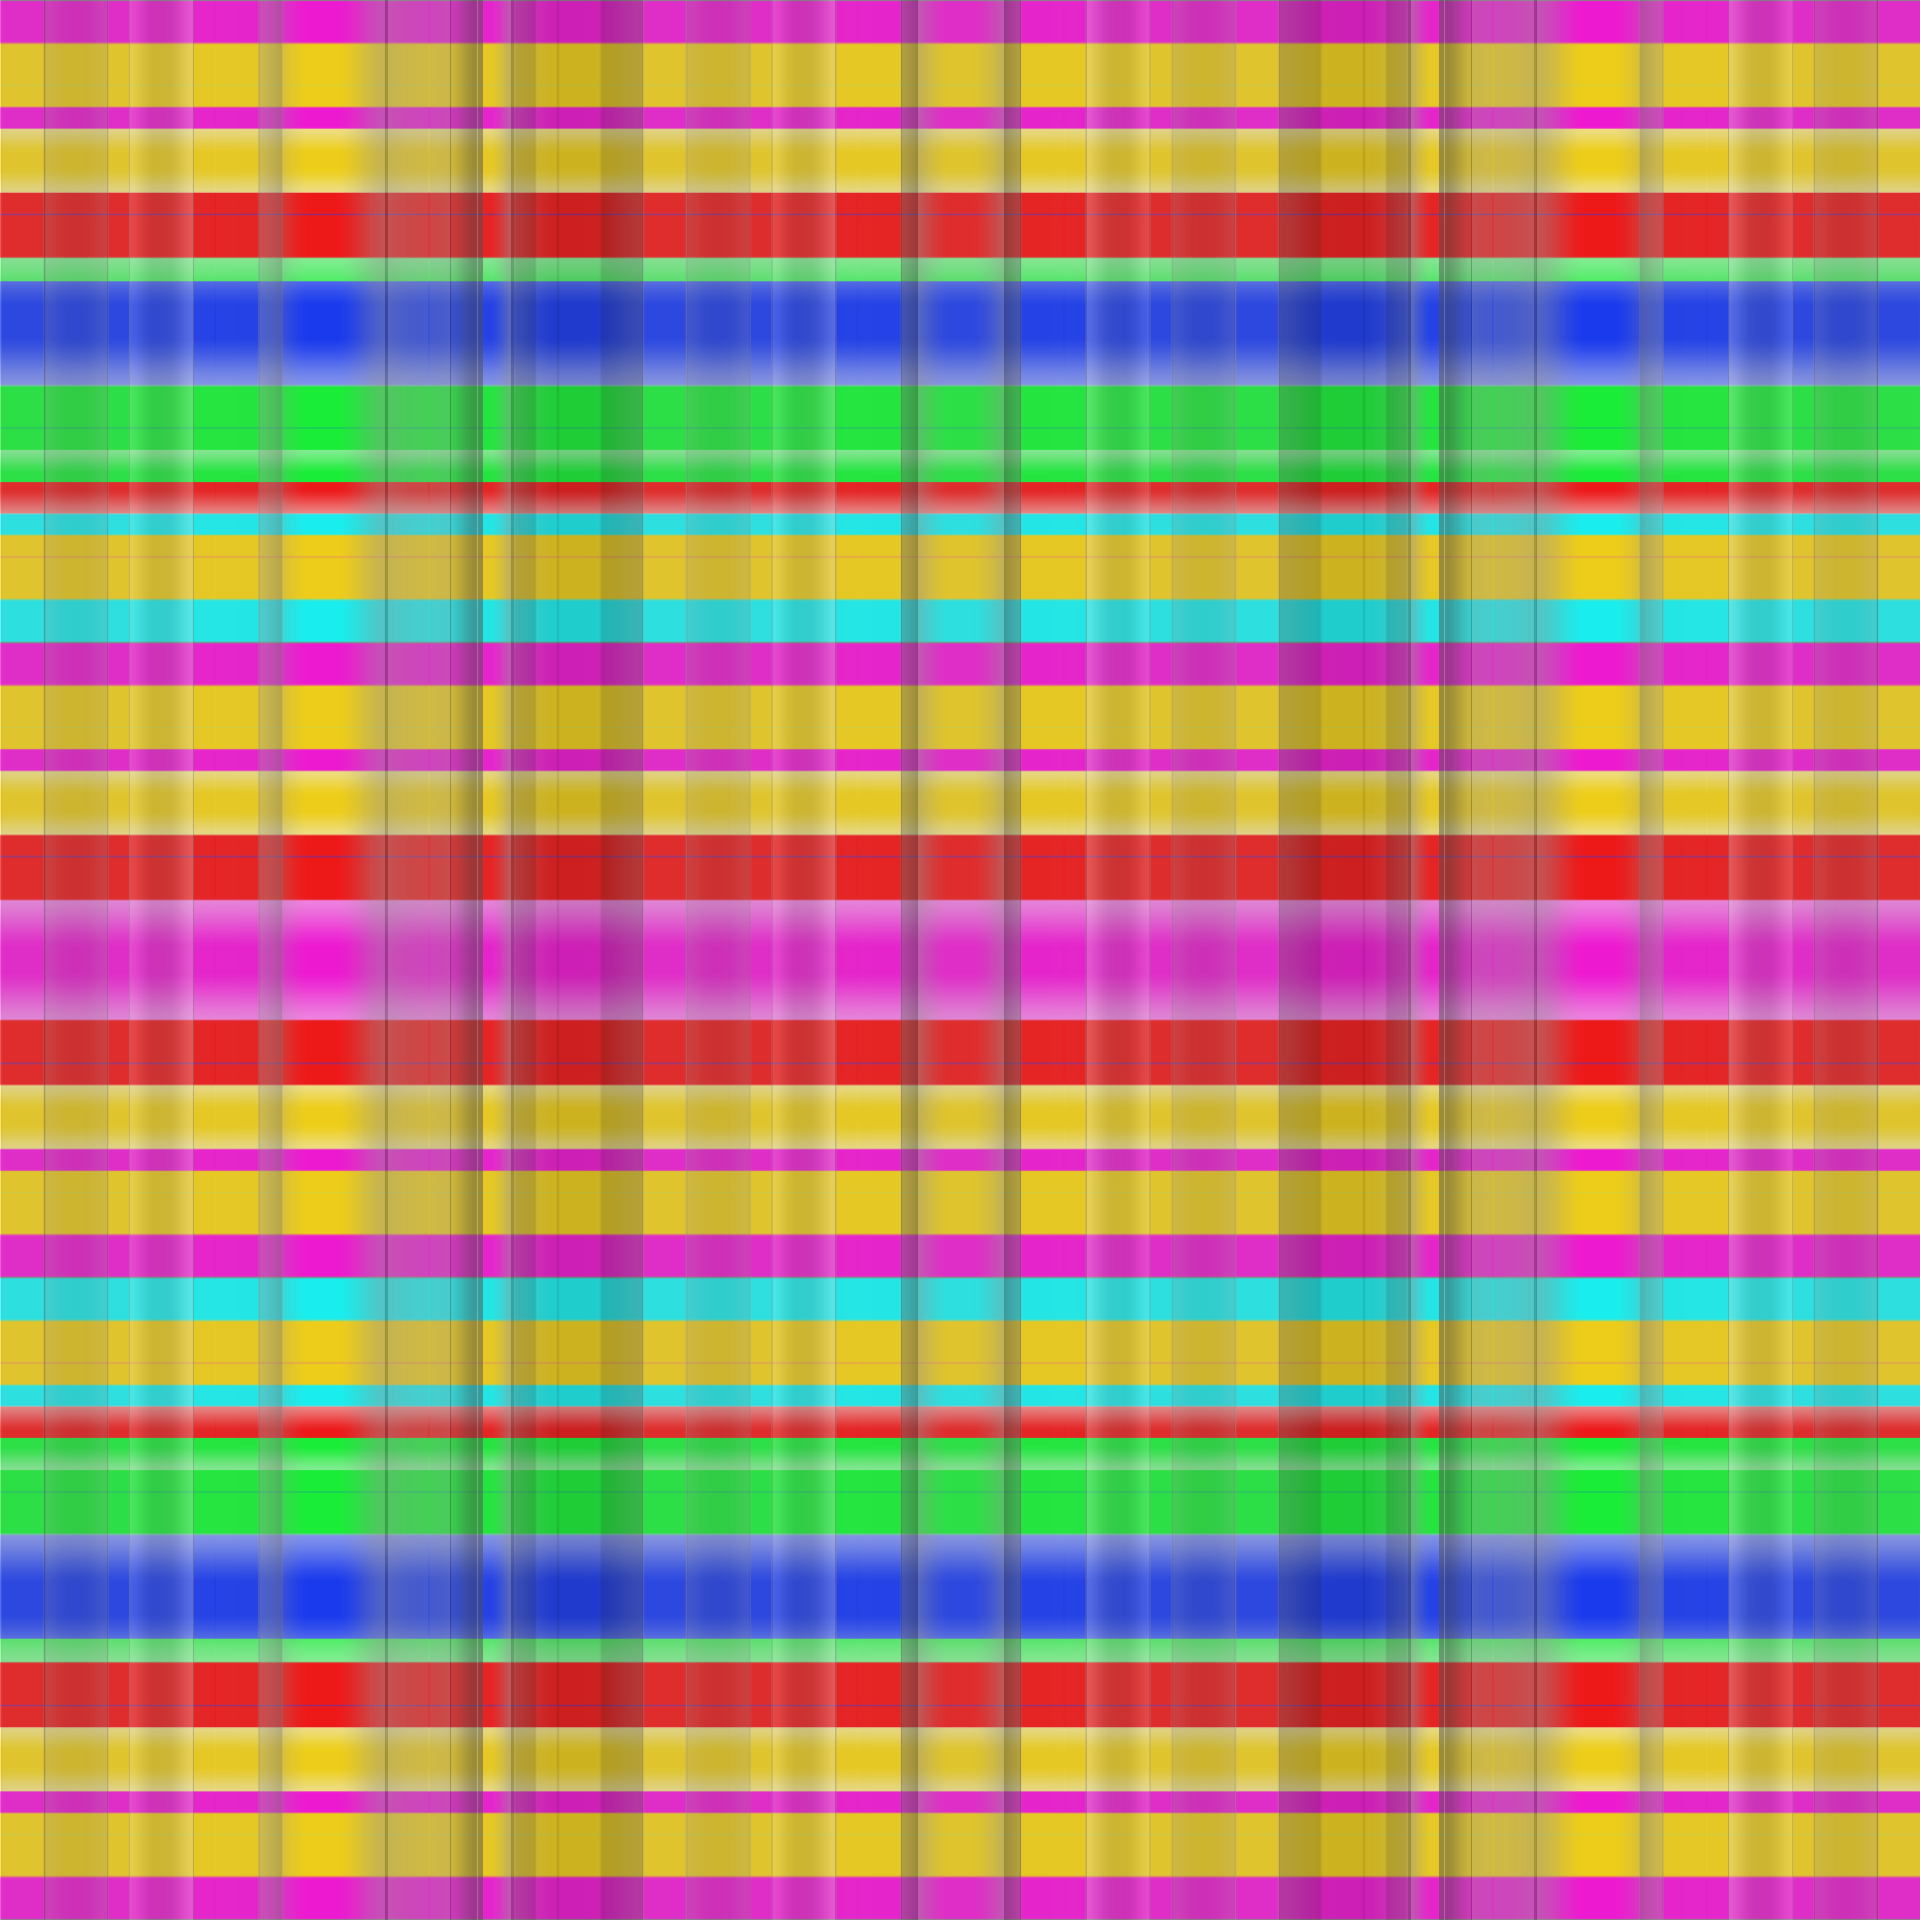 colorful-seamless-pattern-abstract-free-image-download